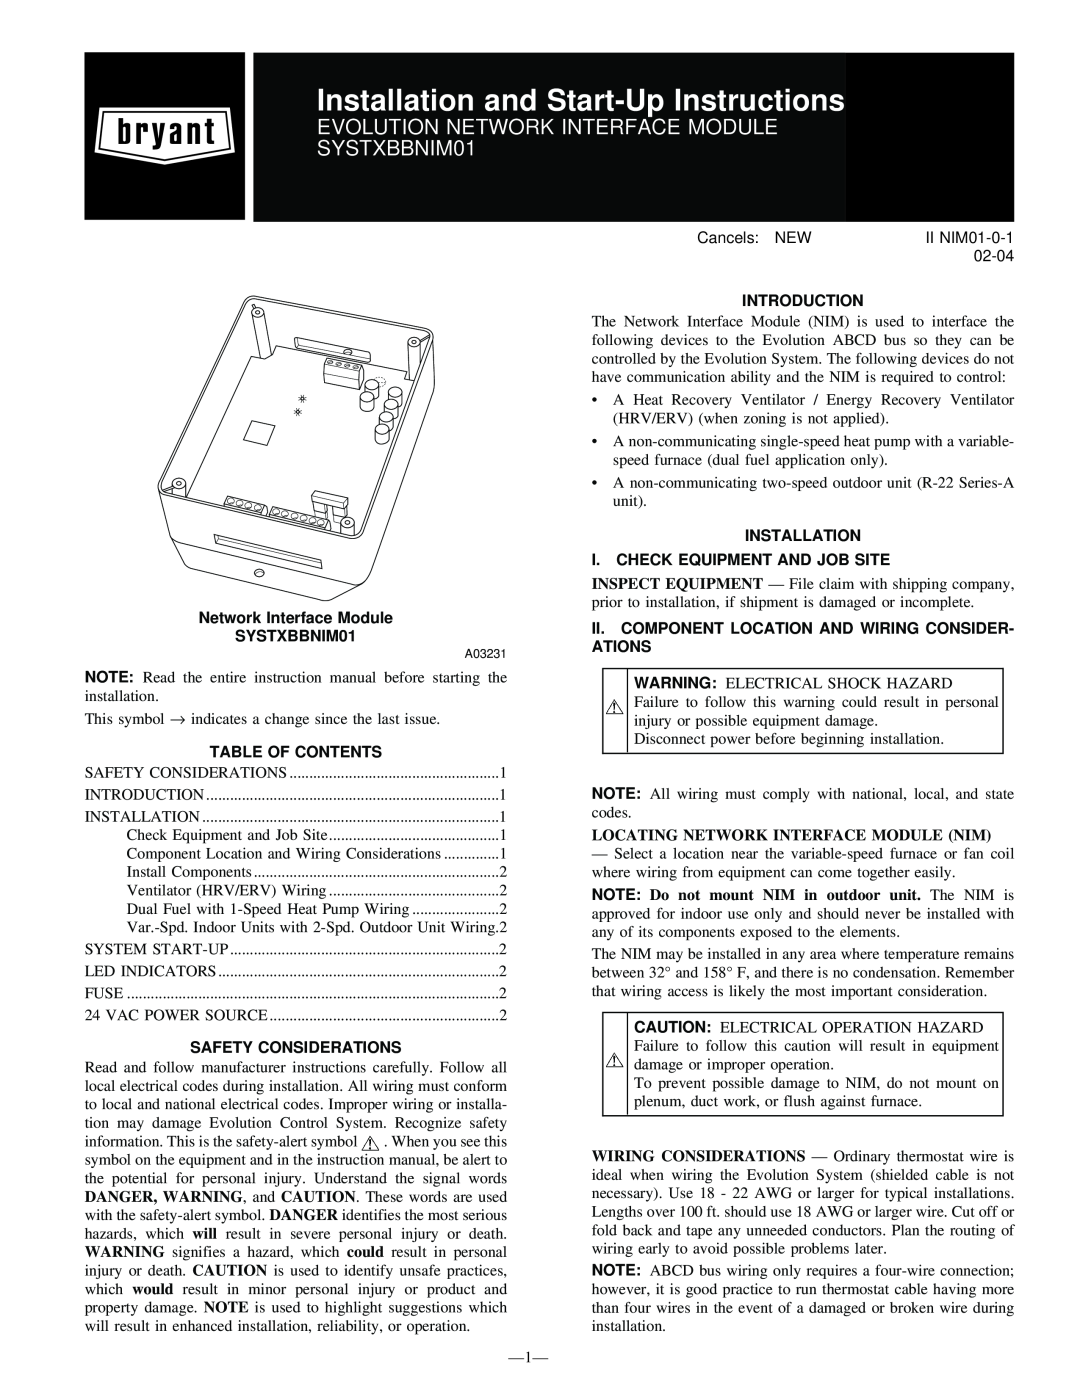 Bryant instruction manual Network Interface Module SYSTXBBNIM01, Table Of Contents, Safety Considerations, Introduction 